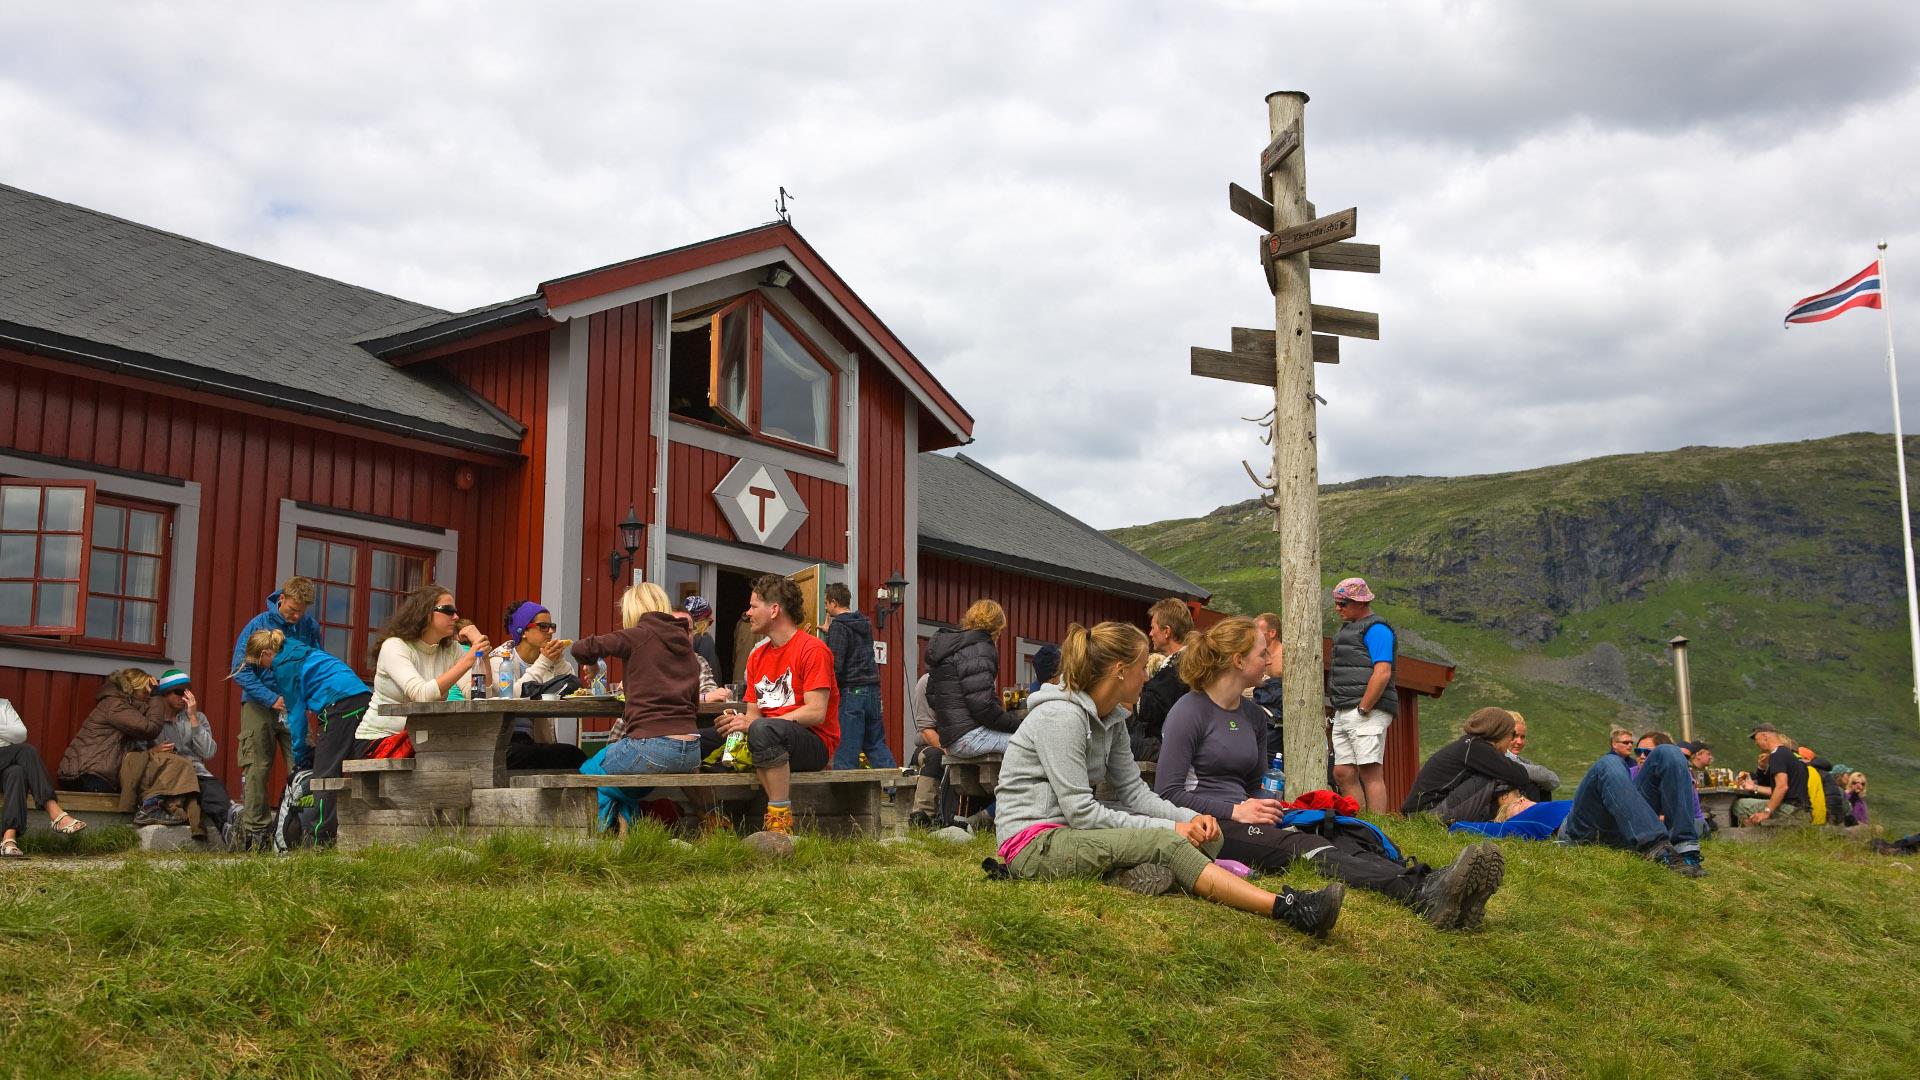 Mountain hikers relax outside the tourist cabin Fondsbu, a red wooden buiding with the logo of the Norwegian Mountain Association (DNT) over the entrance